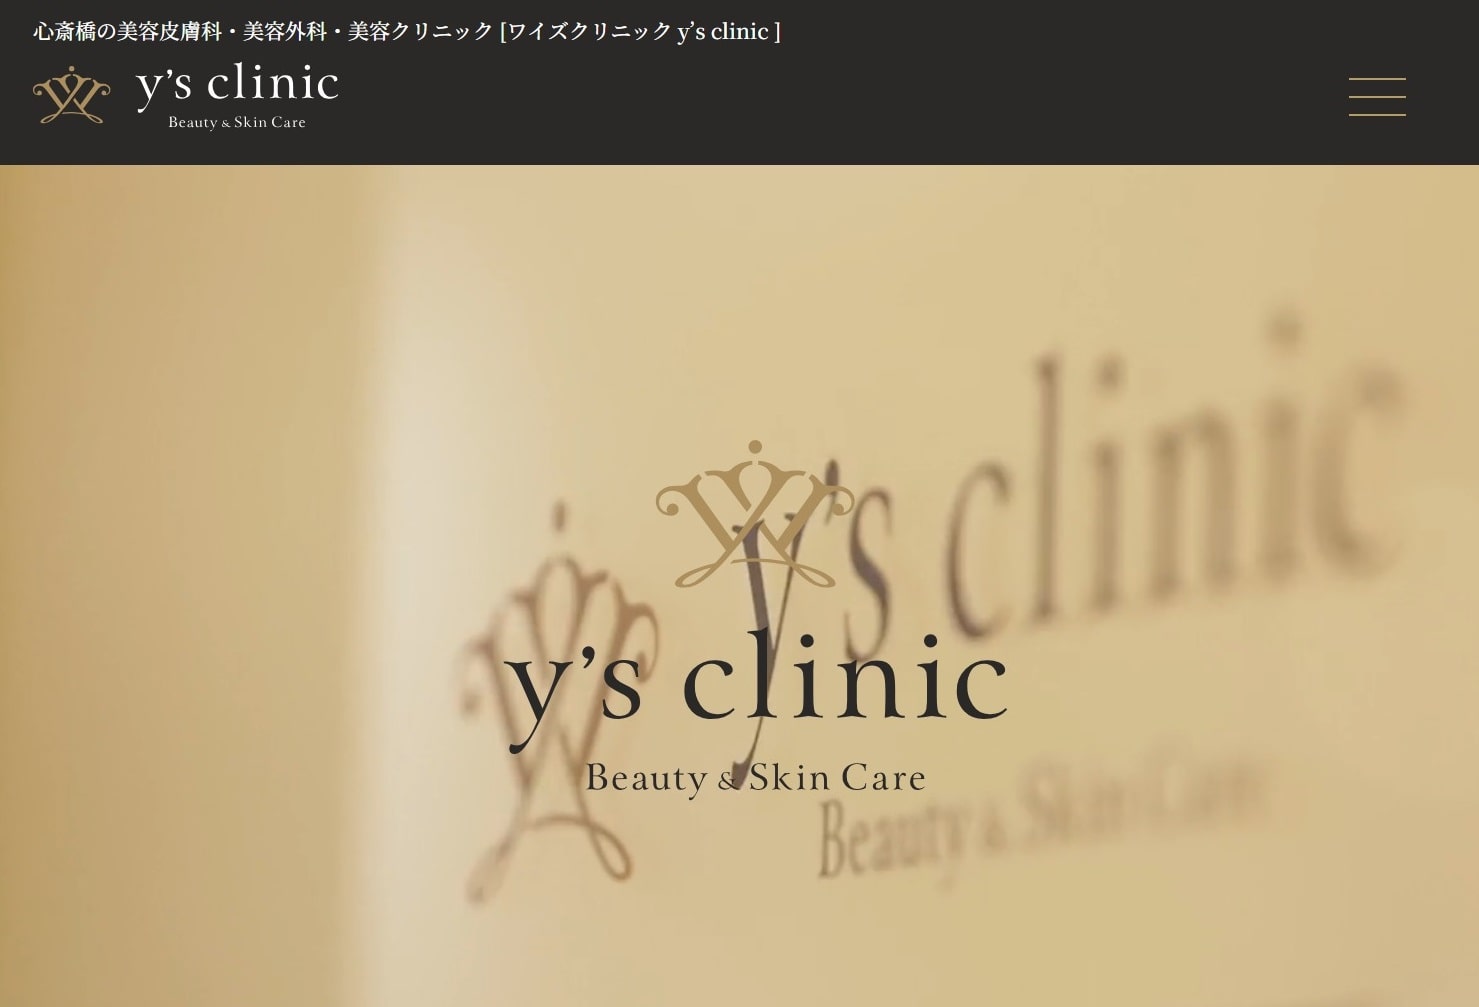 y’s clinic